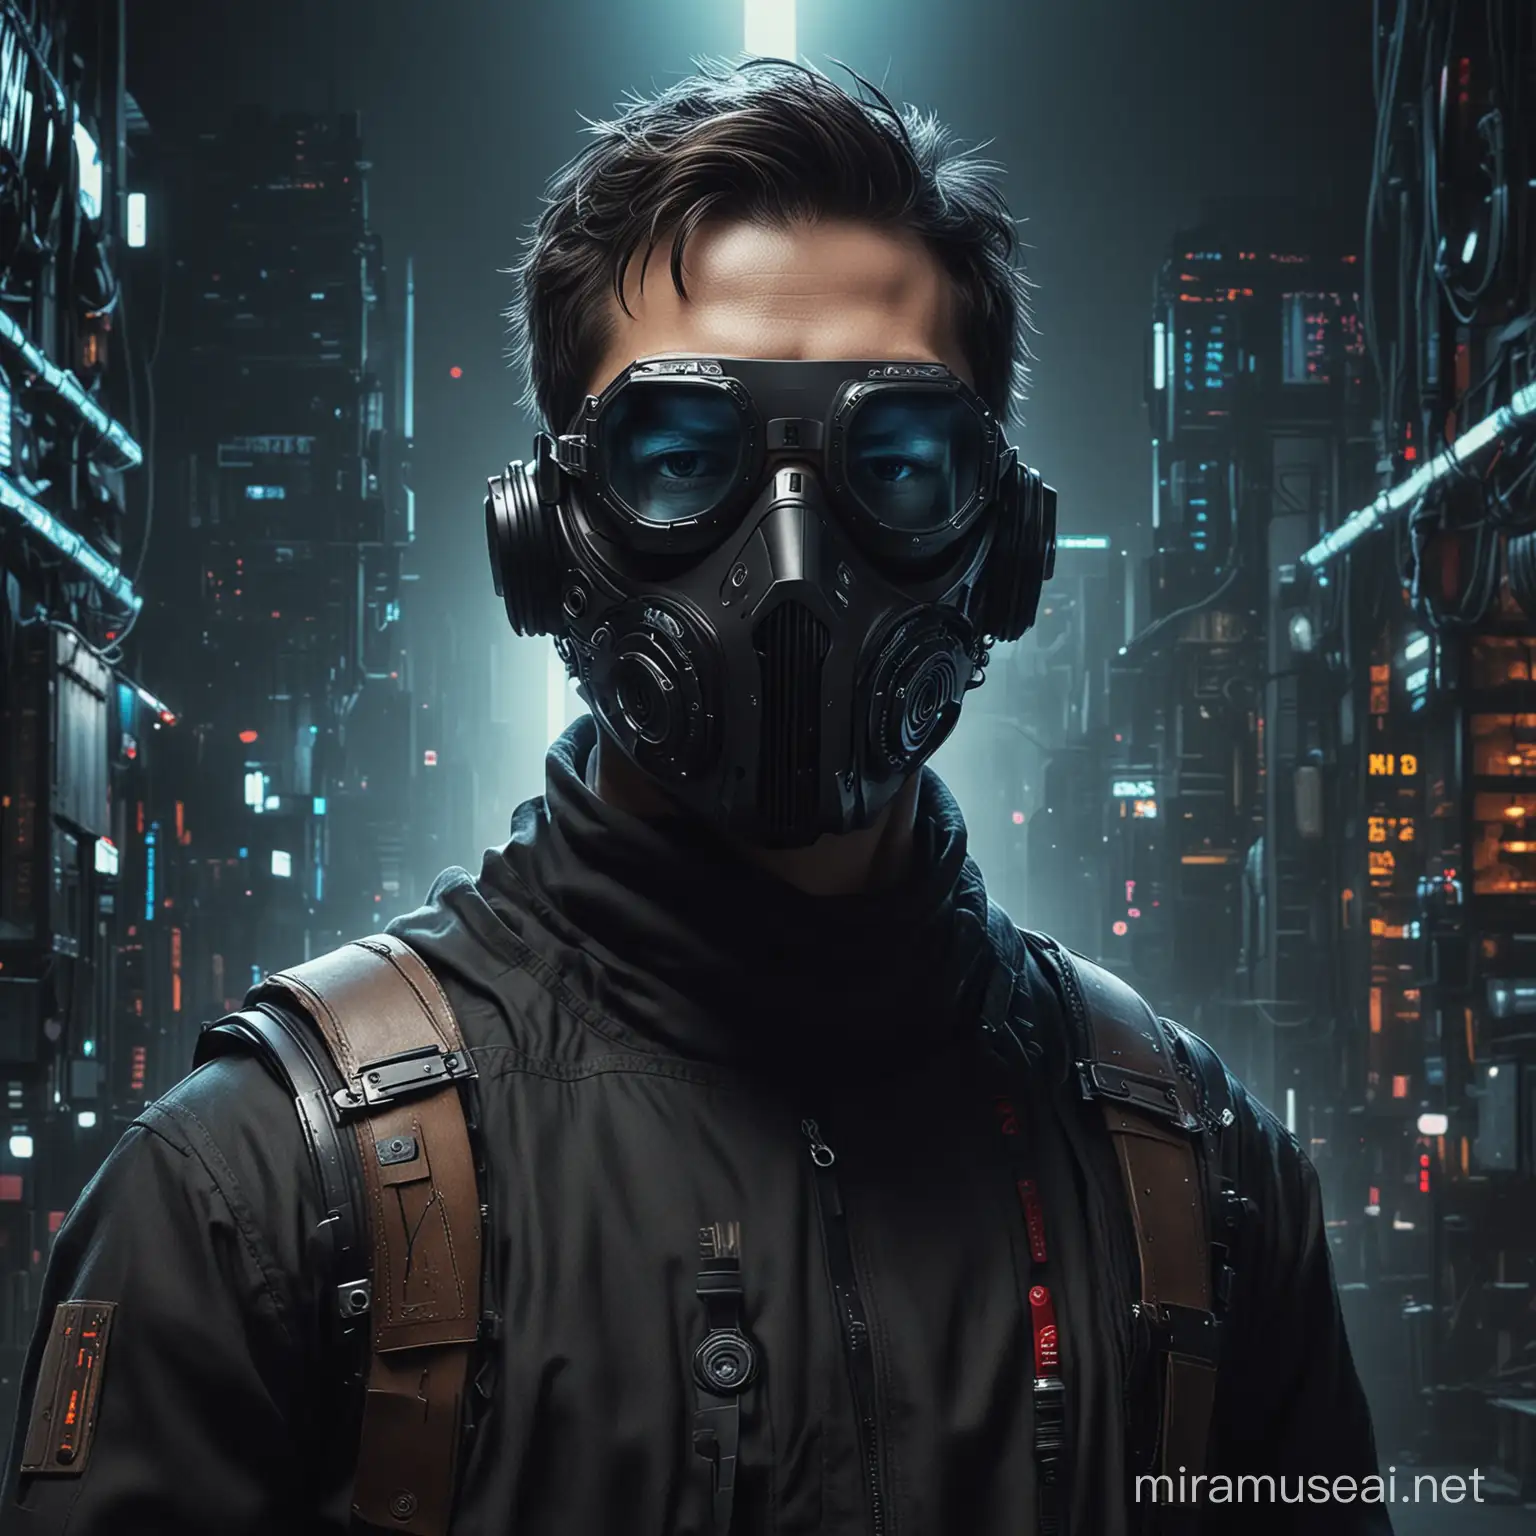 Imagine a movie poster based on the portraying of A Craftsman in creating digital music is transitioning to a master Craftsman music abilities. THe craftsman black and is wearing futuristic clothes, he has on an advanced cyberpunk respiratory mask covering his mouth and an advanced eye protection covering his eyes. 